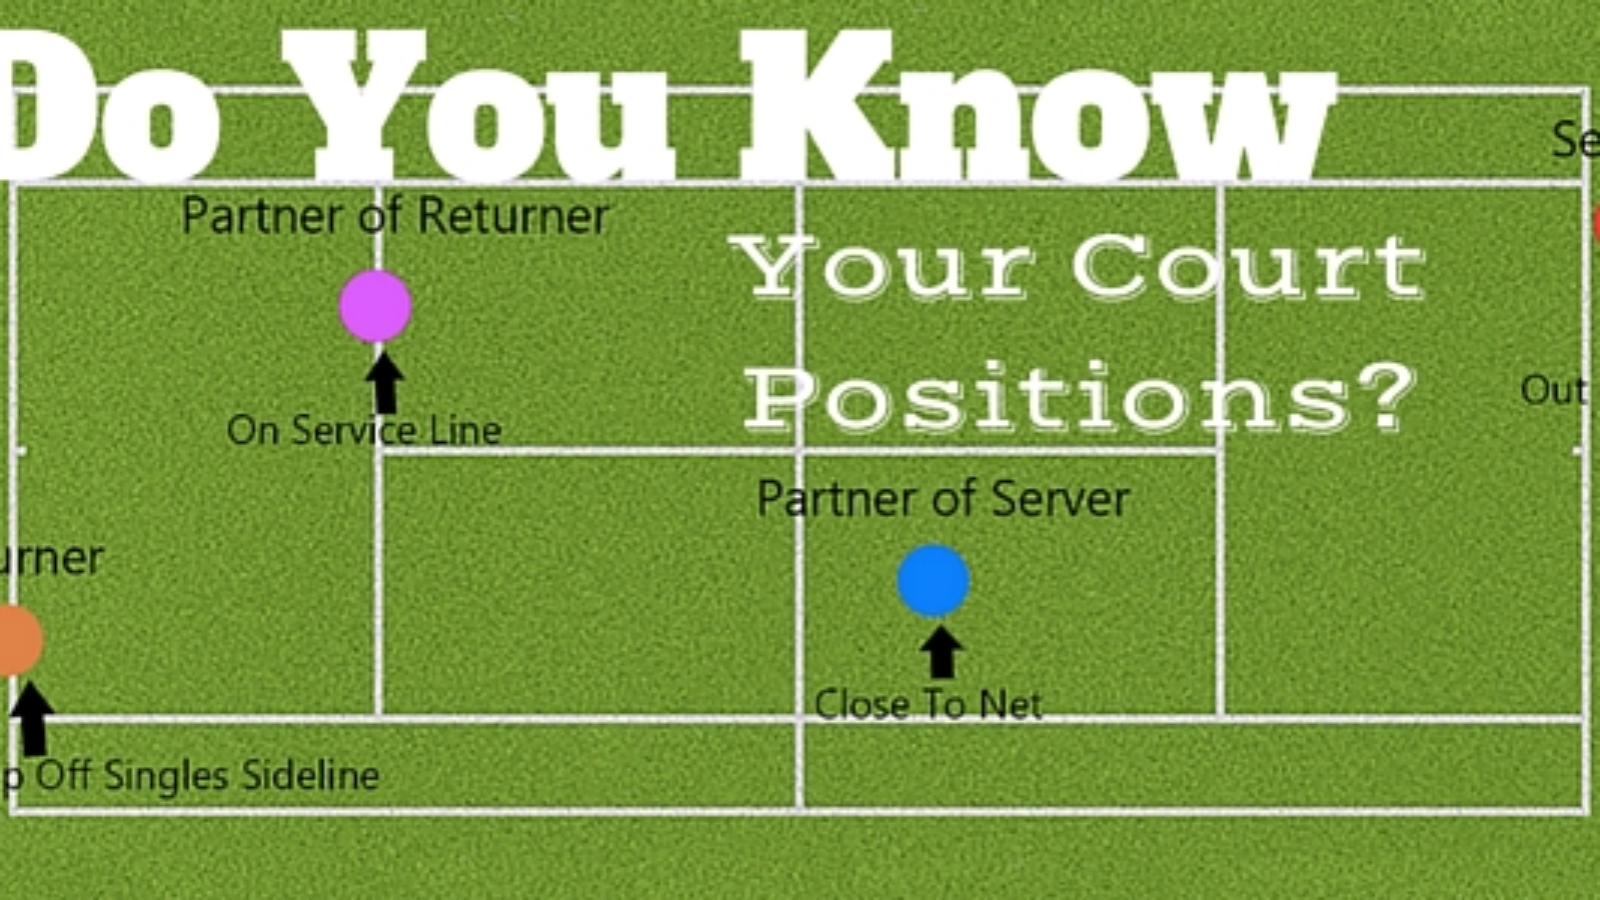 Tips fo Court Positioning in Tennis